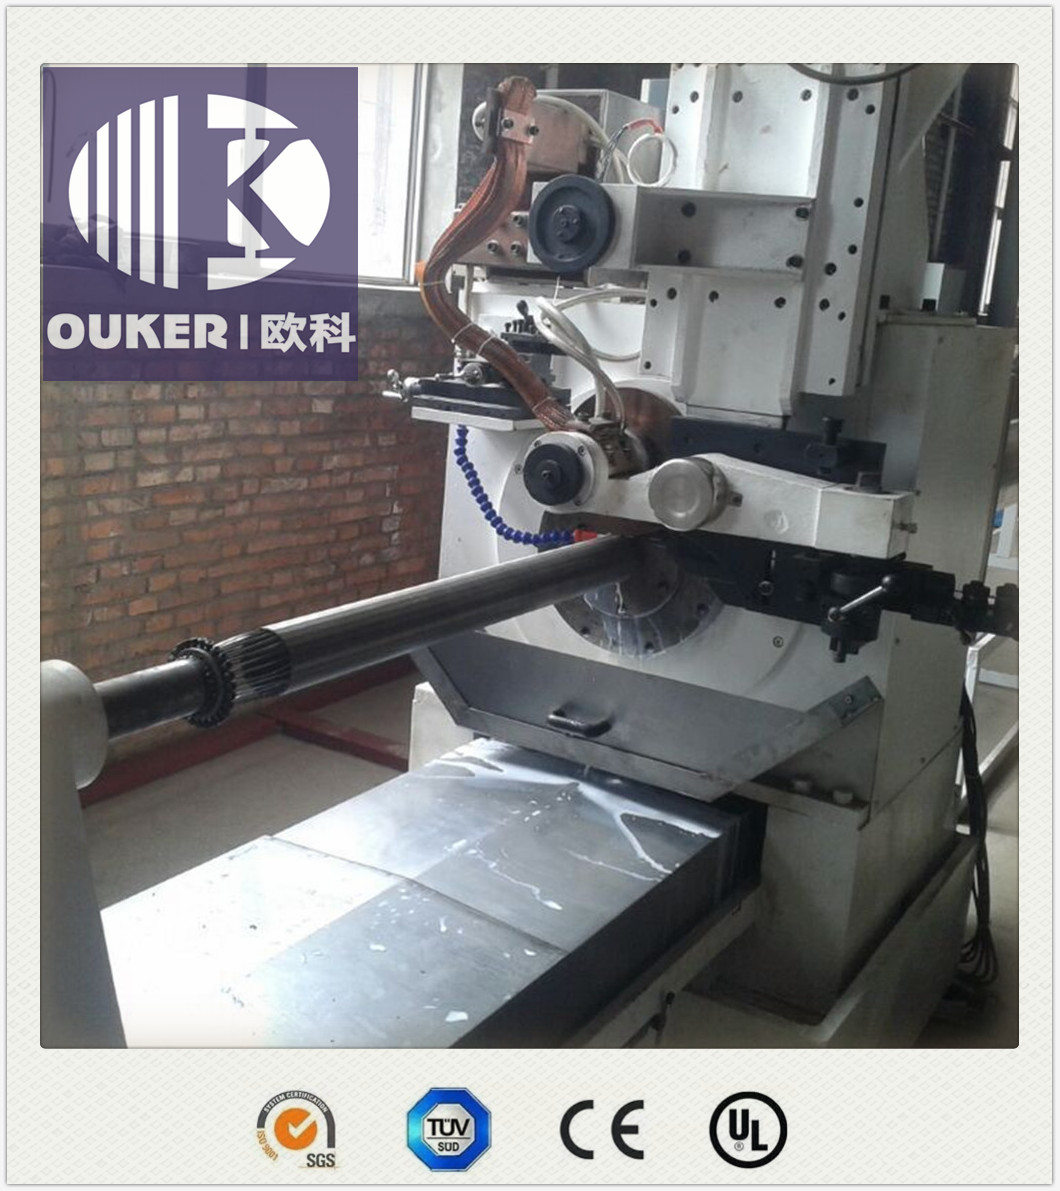 Ouker wire mesh high precision wire wrapped screen welding machine